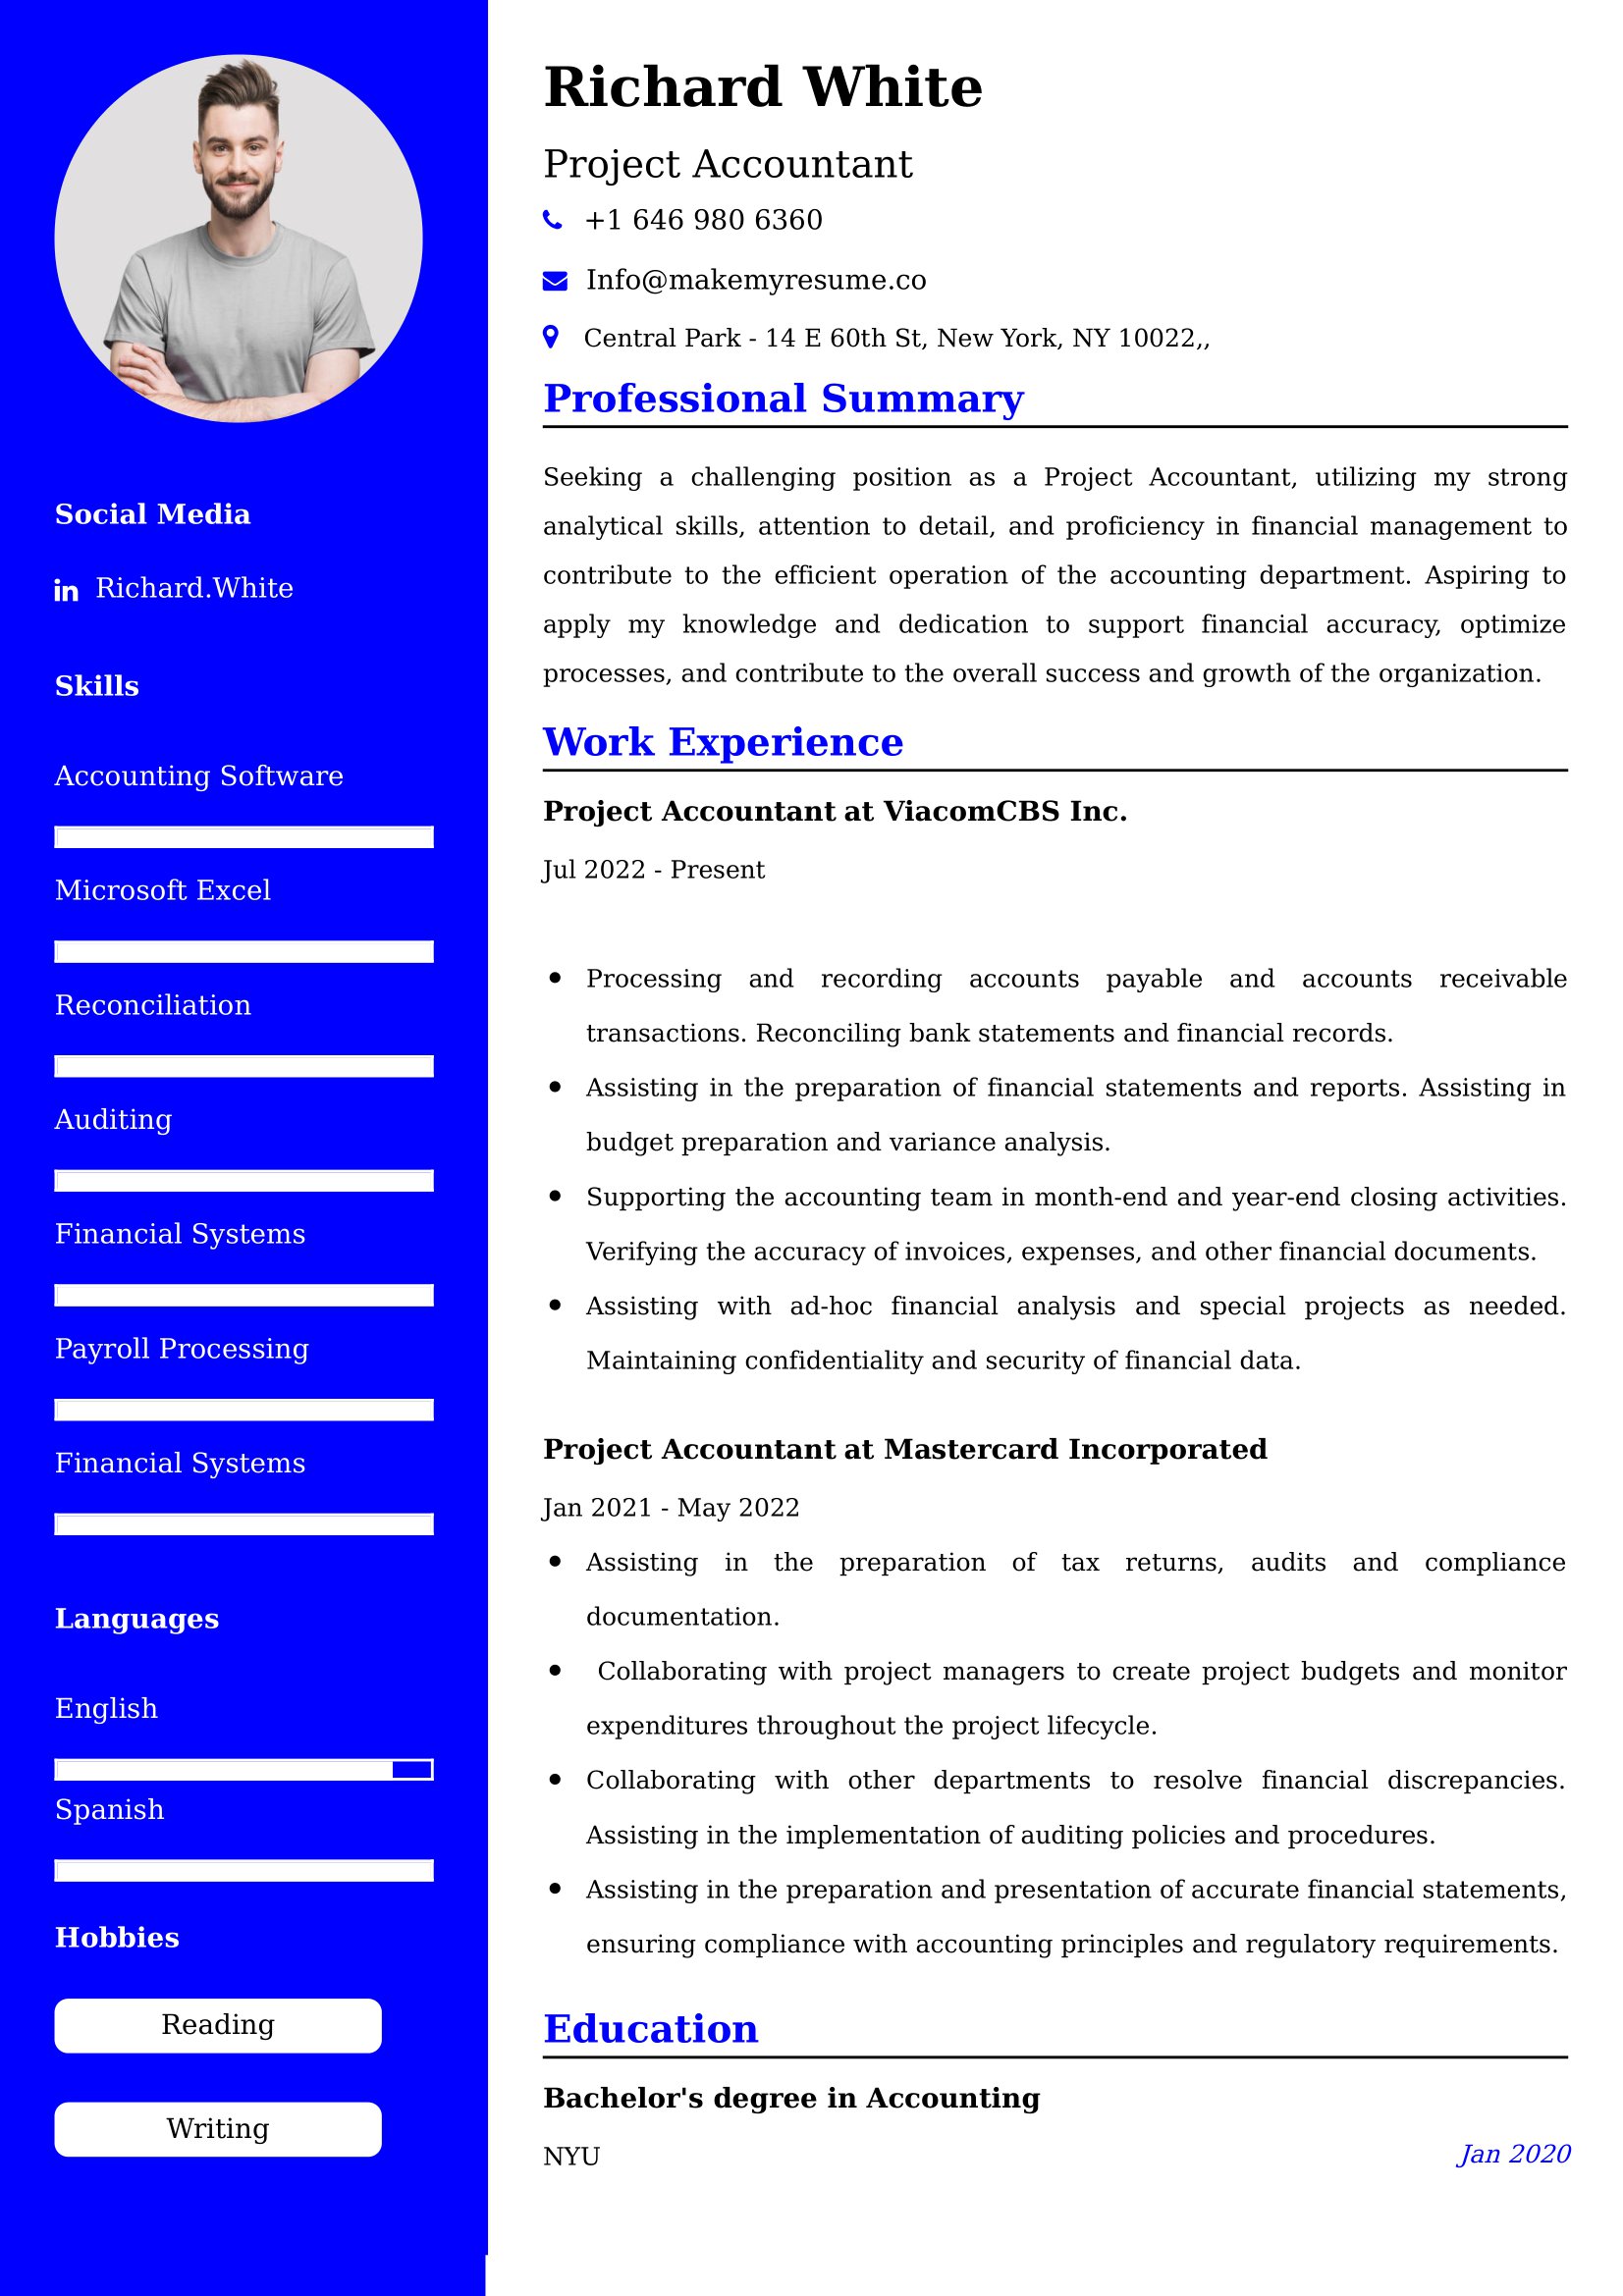 Project Accountant Resume Examples - UK Format, Latest Template.